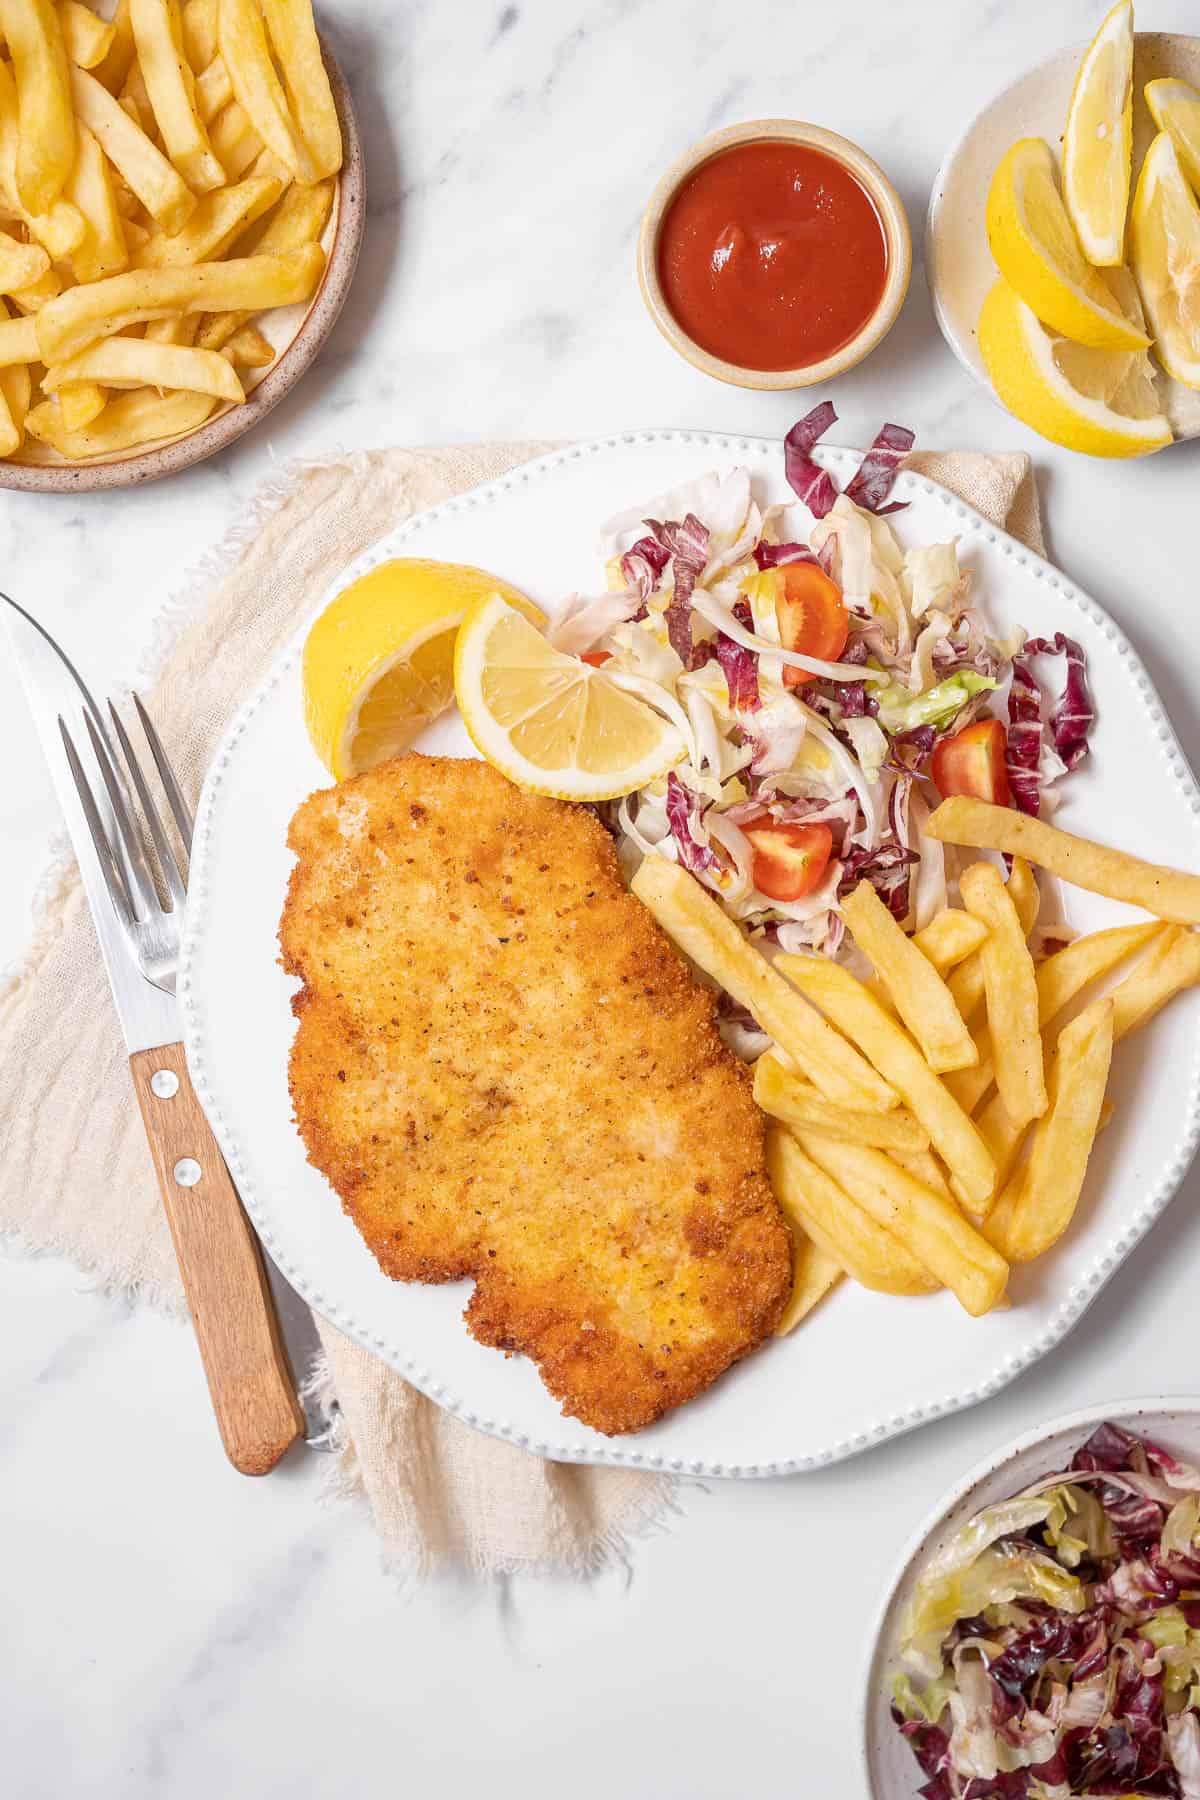 chicken milanesa with french fries and salad.